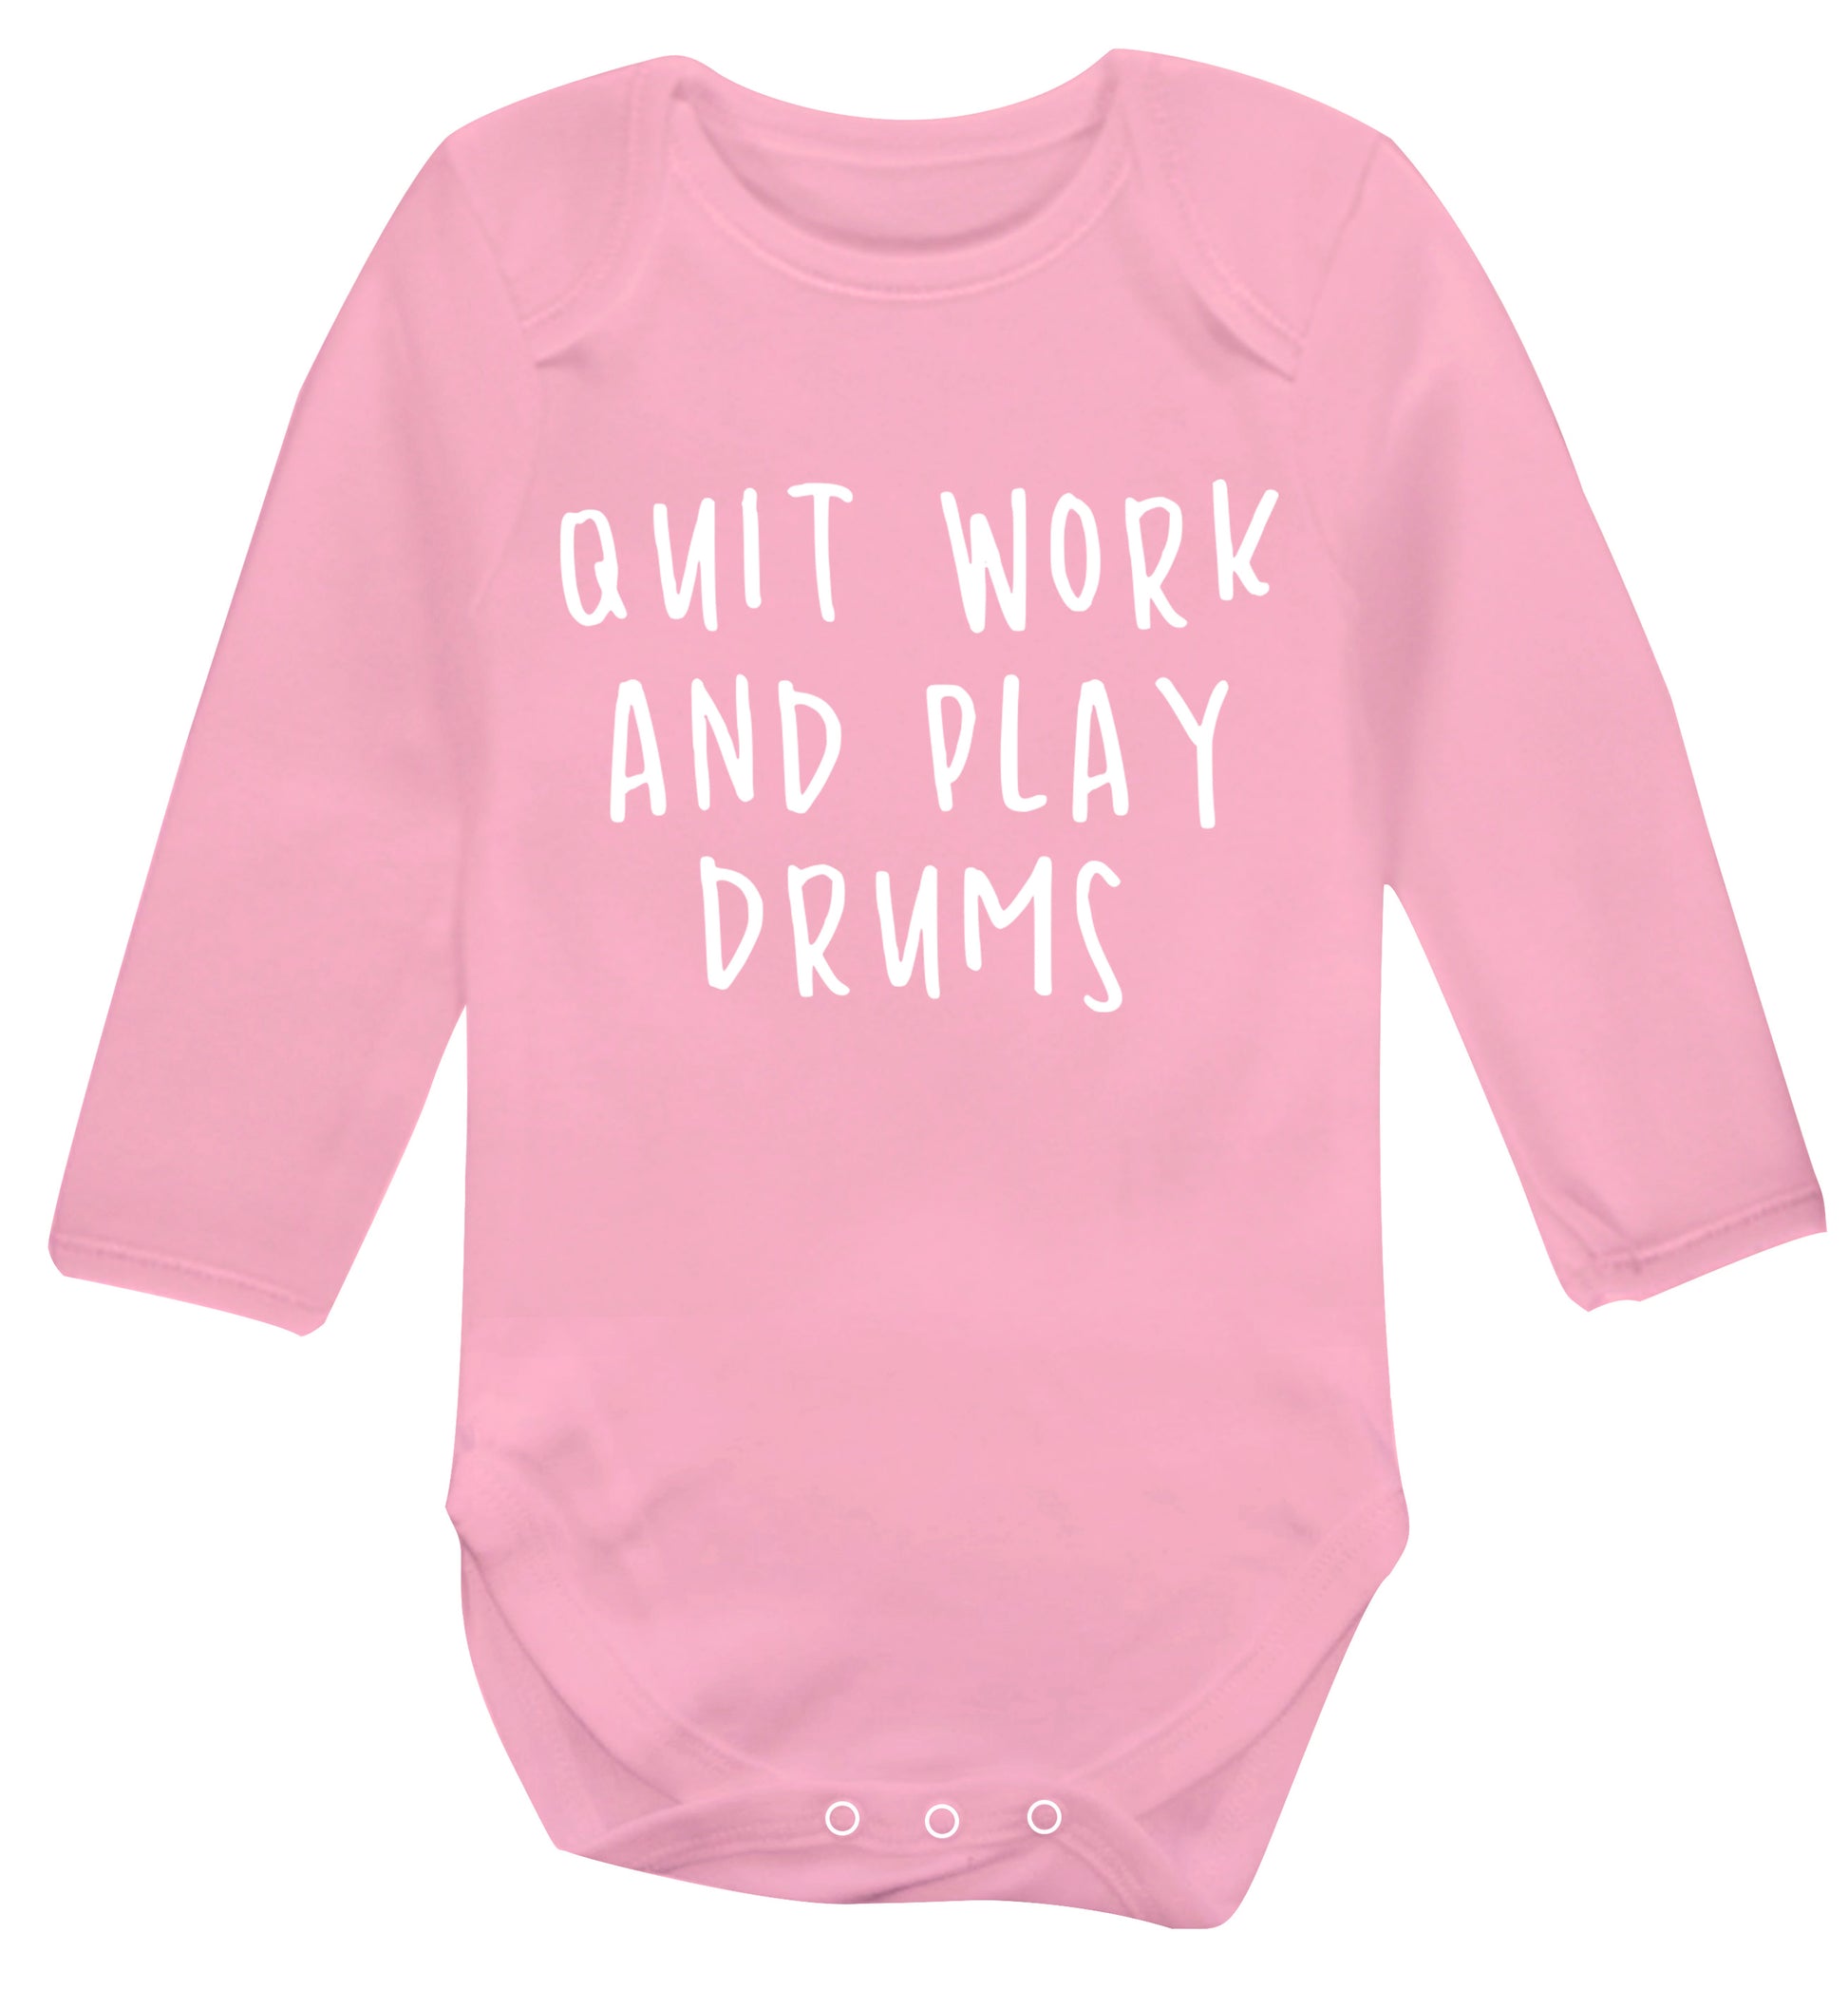 Quit work and play drums Baby Vest long sleeved pale pink 6-12 months